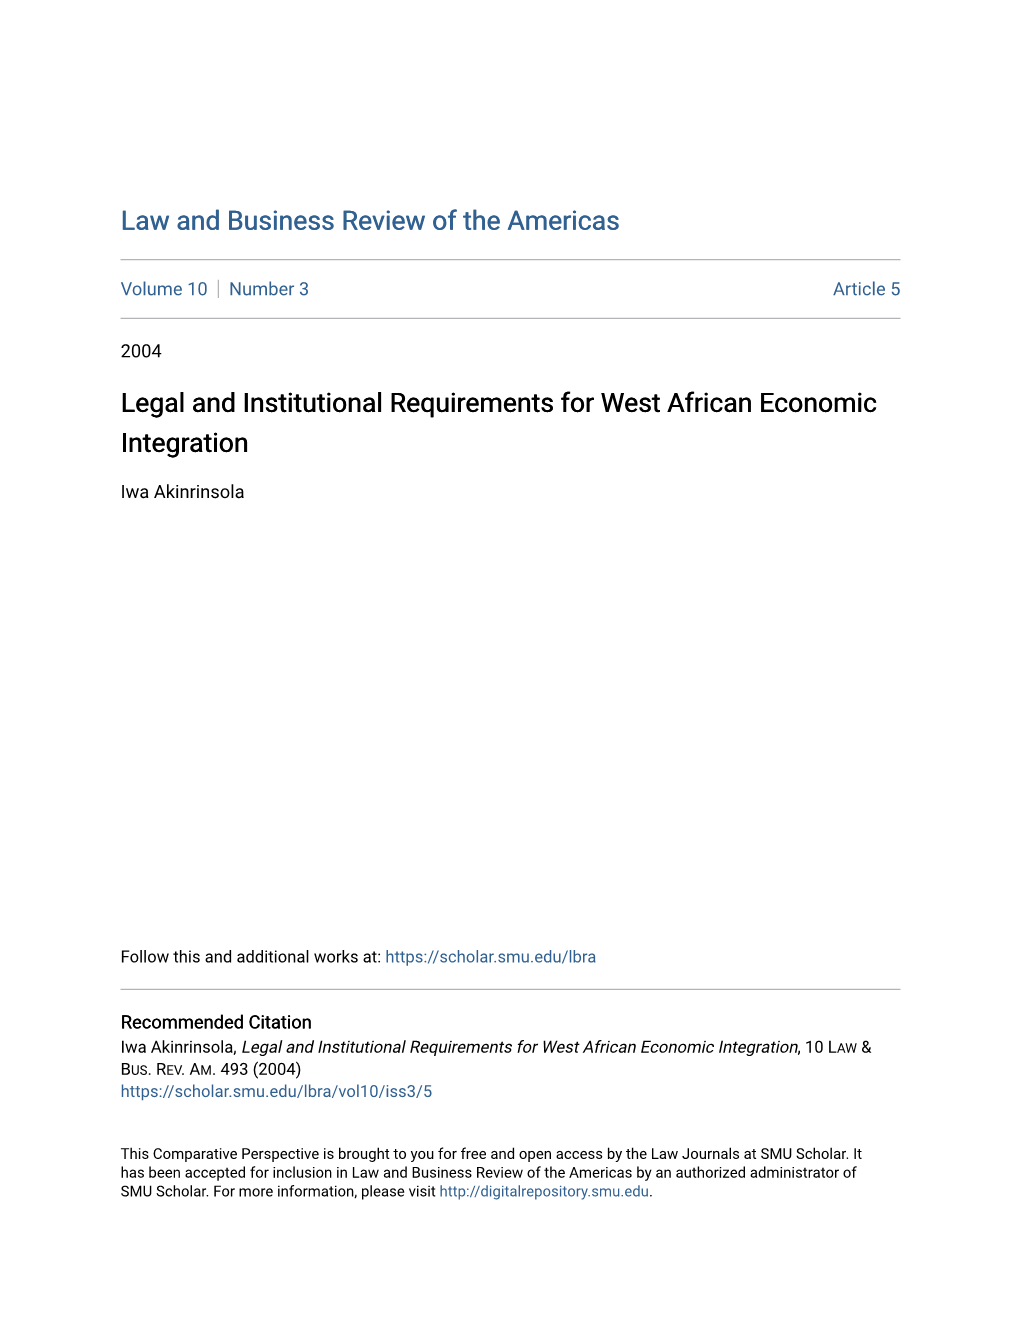 Legal and Institutional Requirements for West African Economic Integration